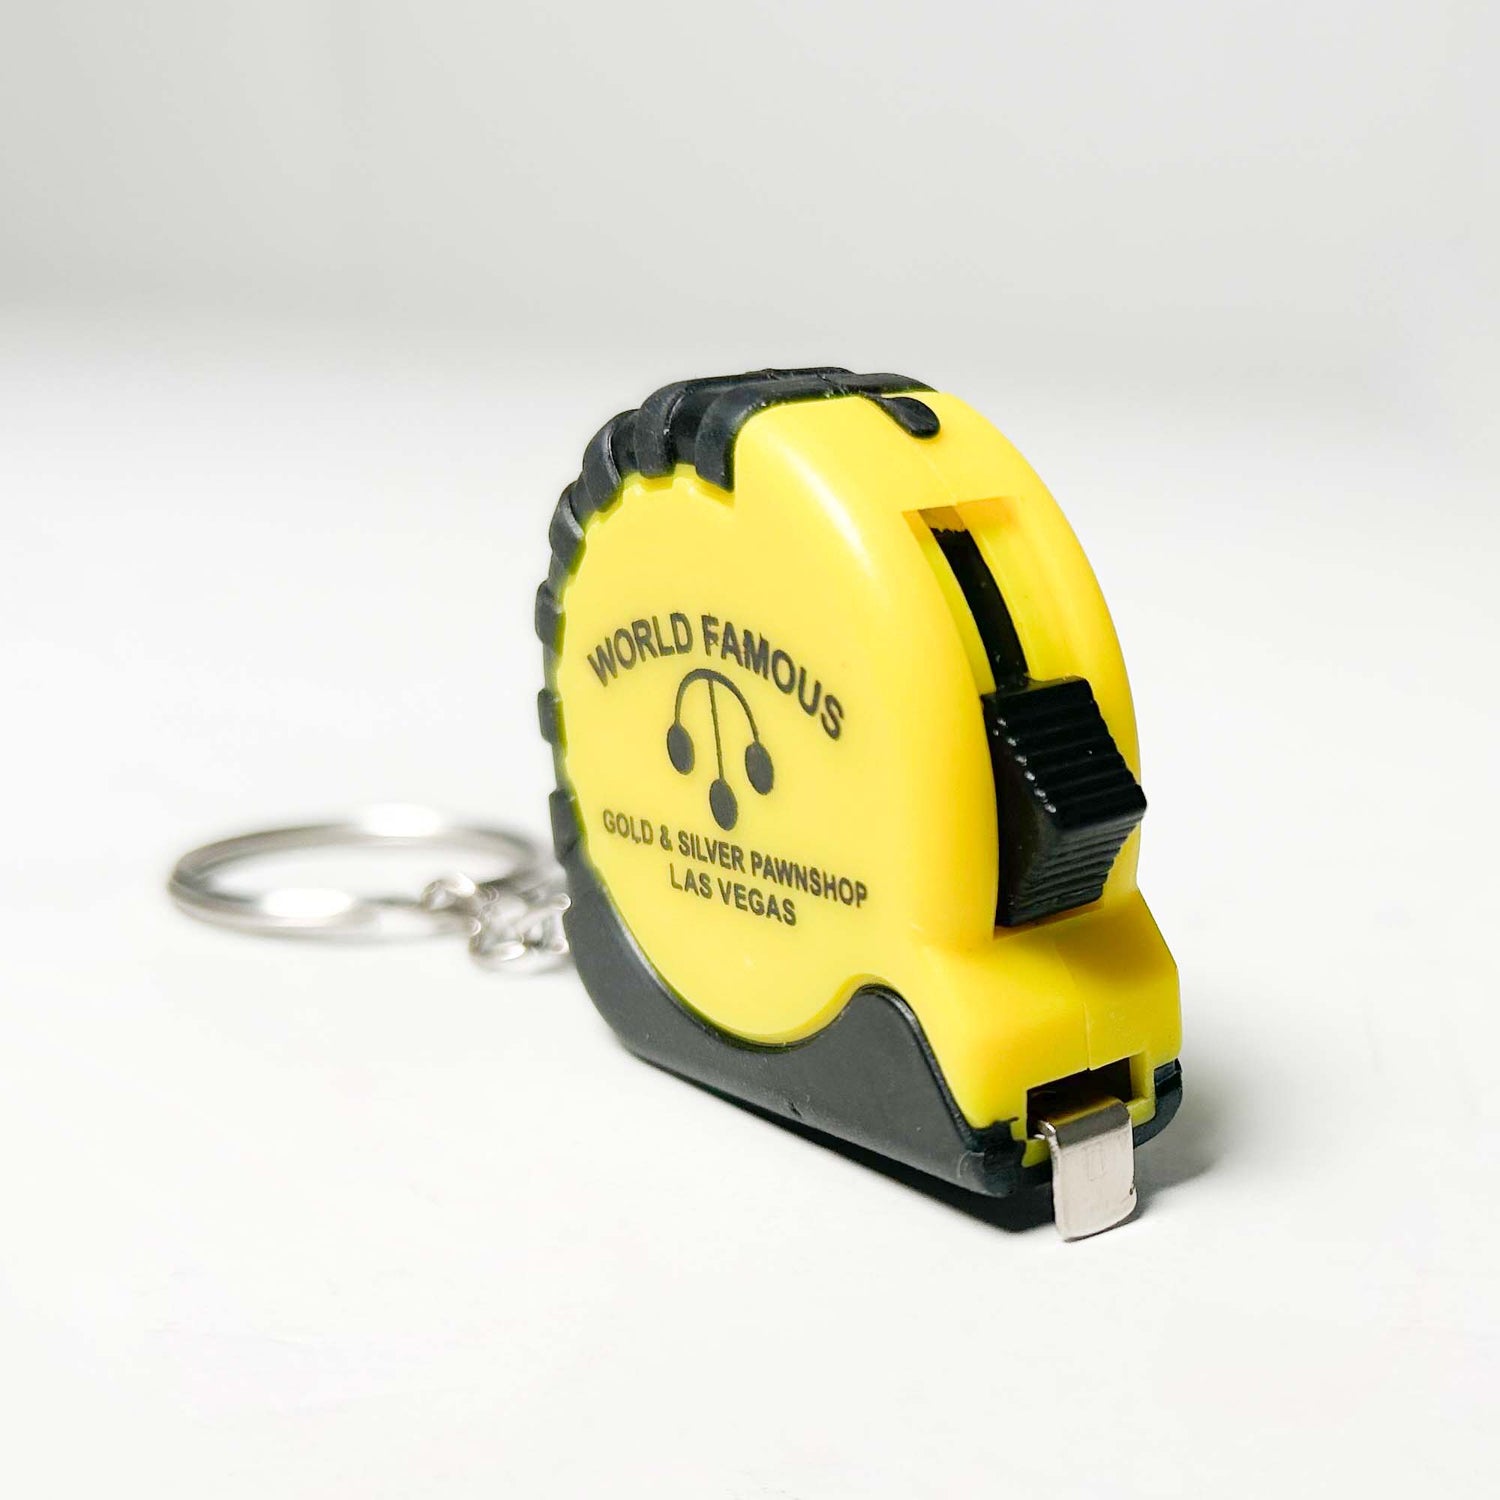 Gold & Silver Pawn Shop Tape Measure ZOOM